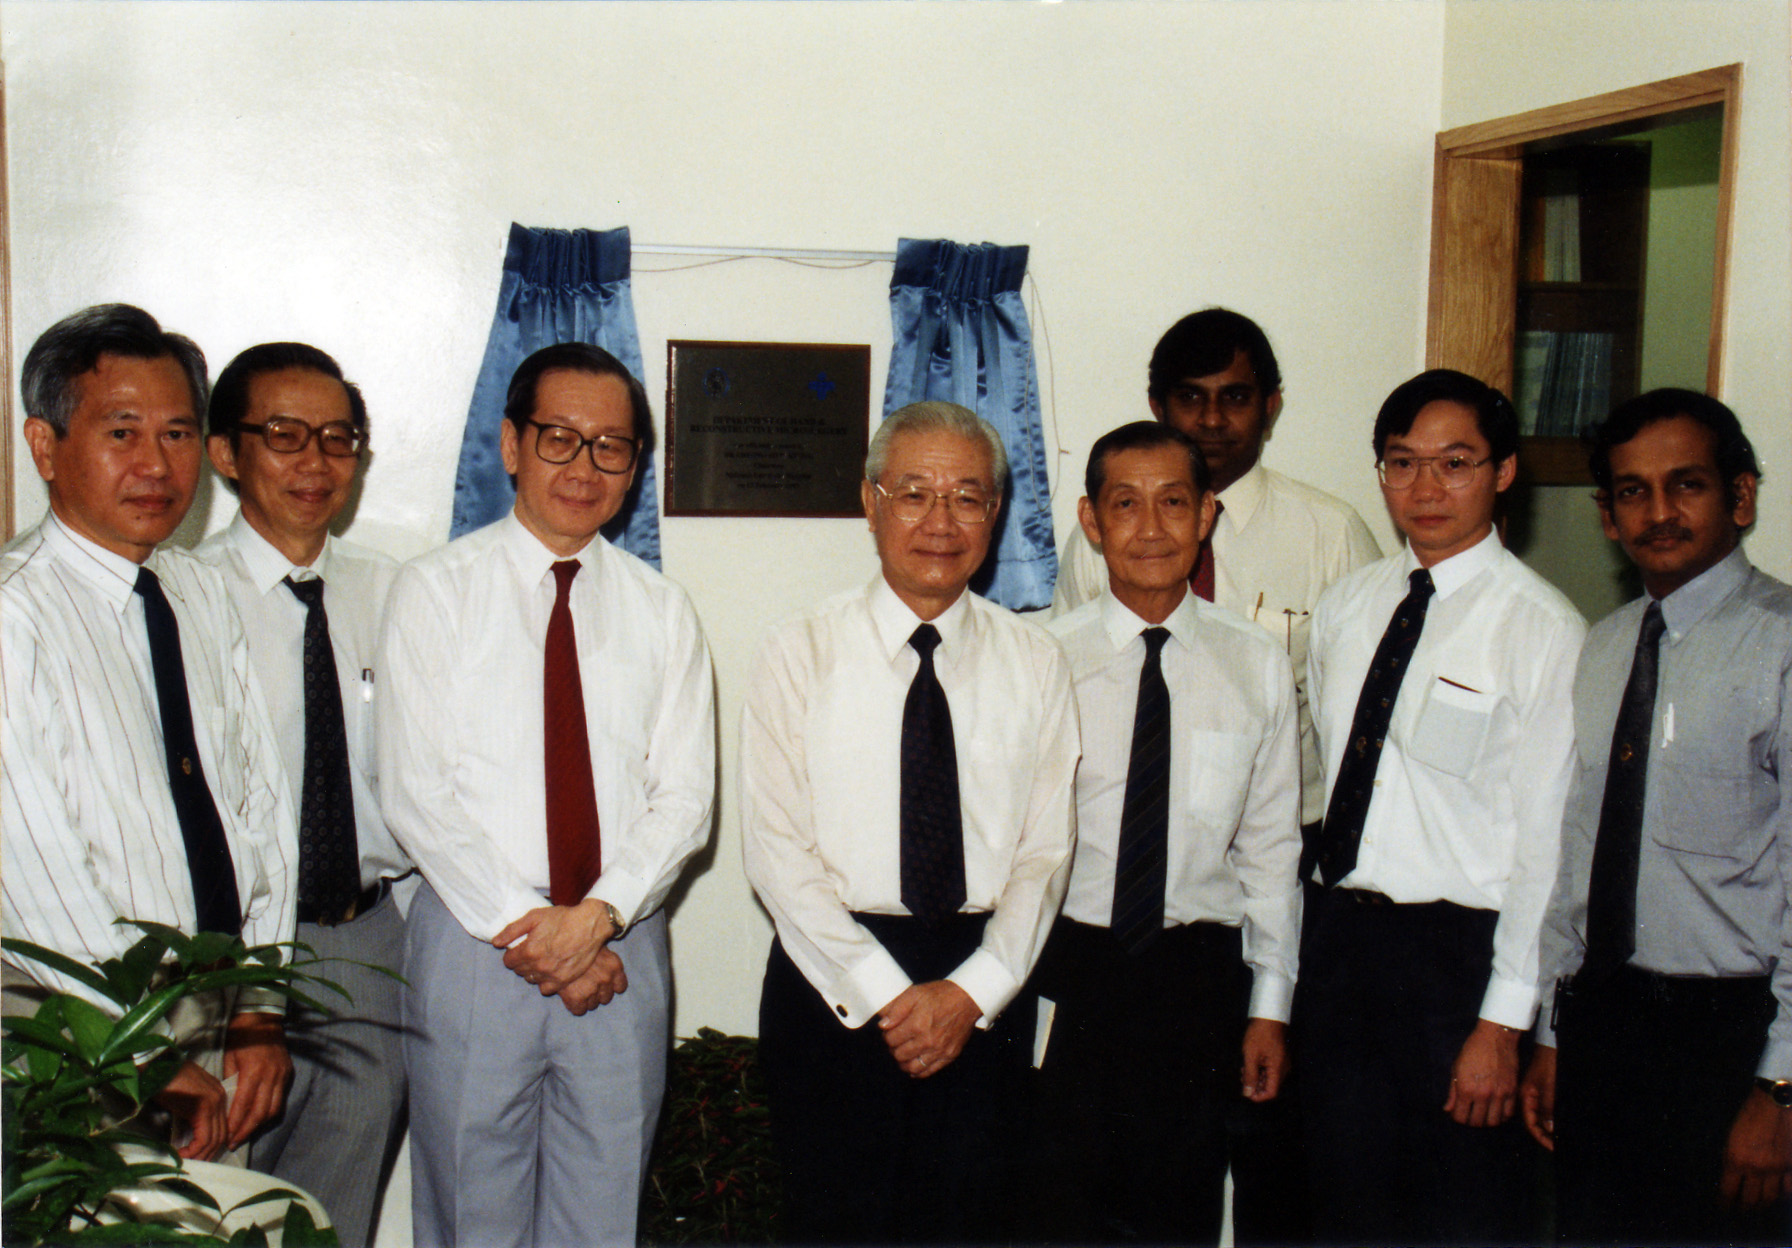 Hand and Reconstructive Micro Surgery Centre (HRM) Opening Ceremony 1993